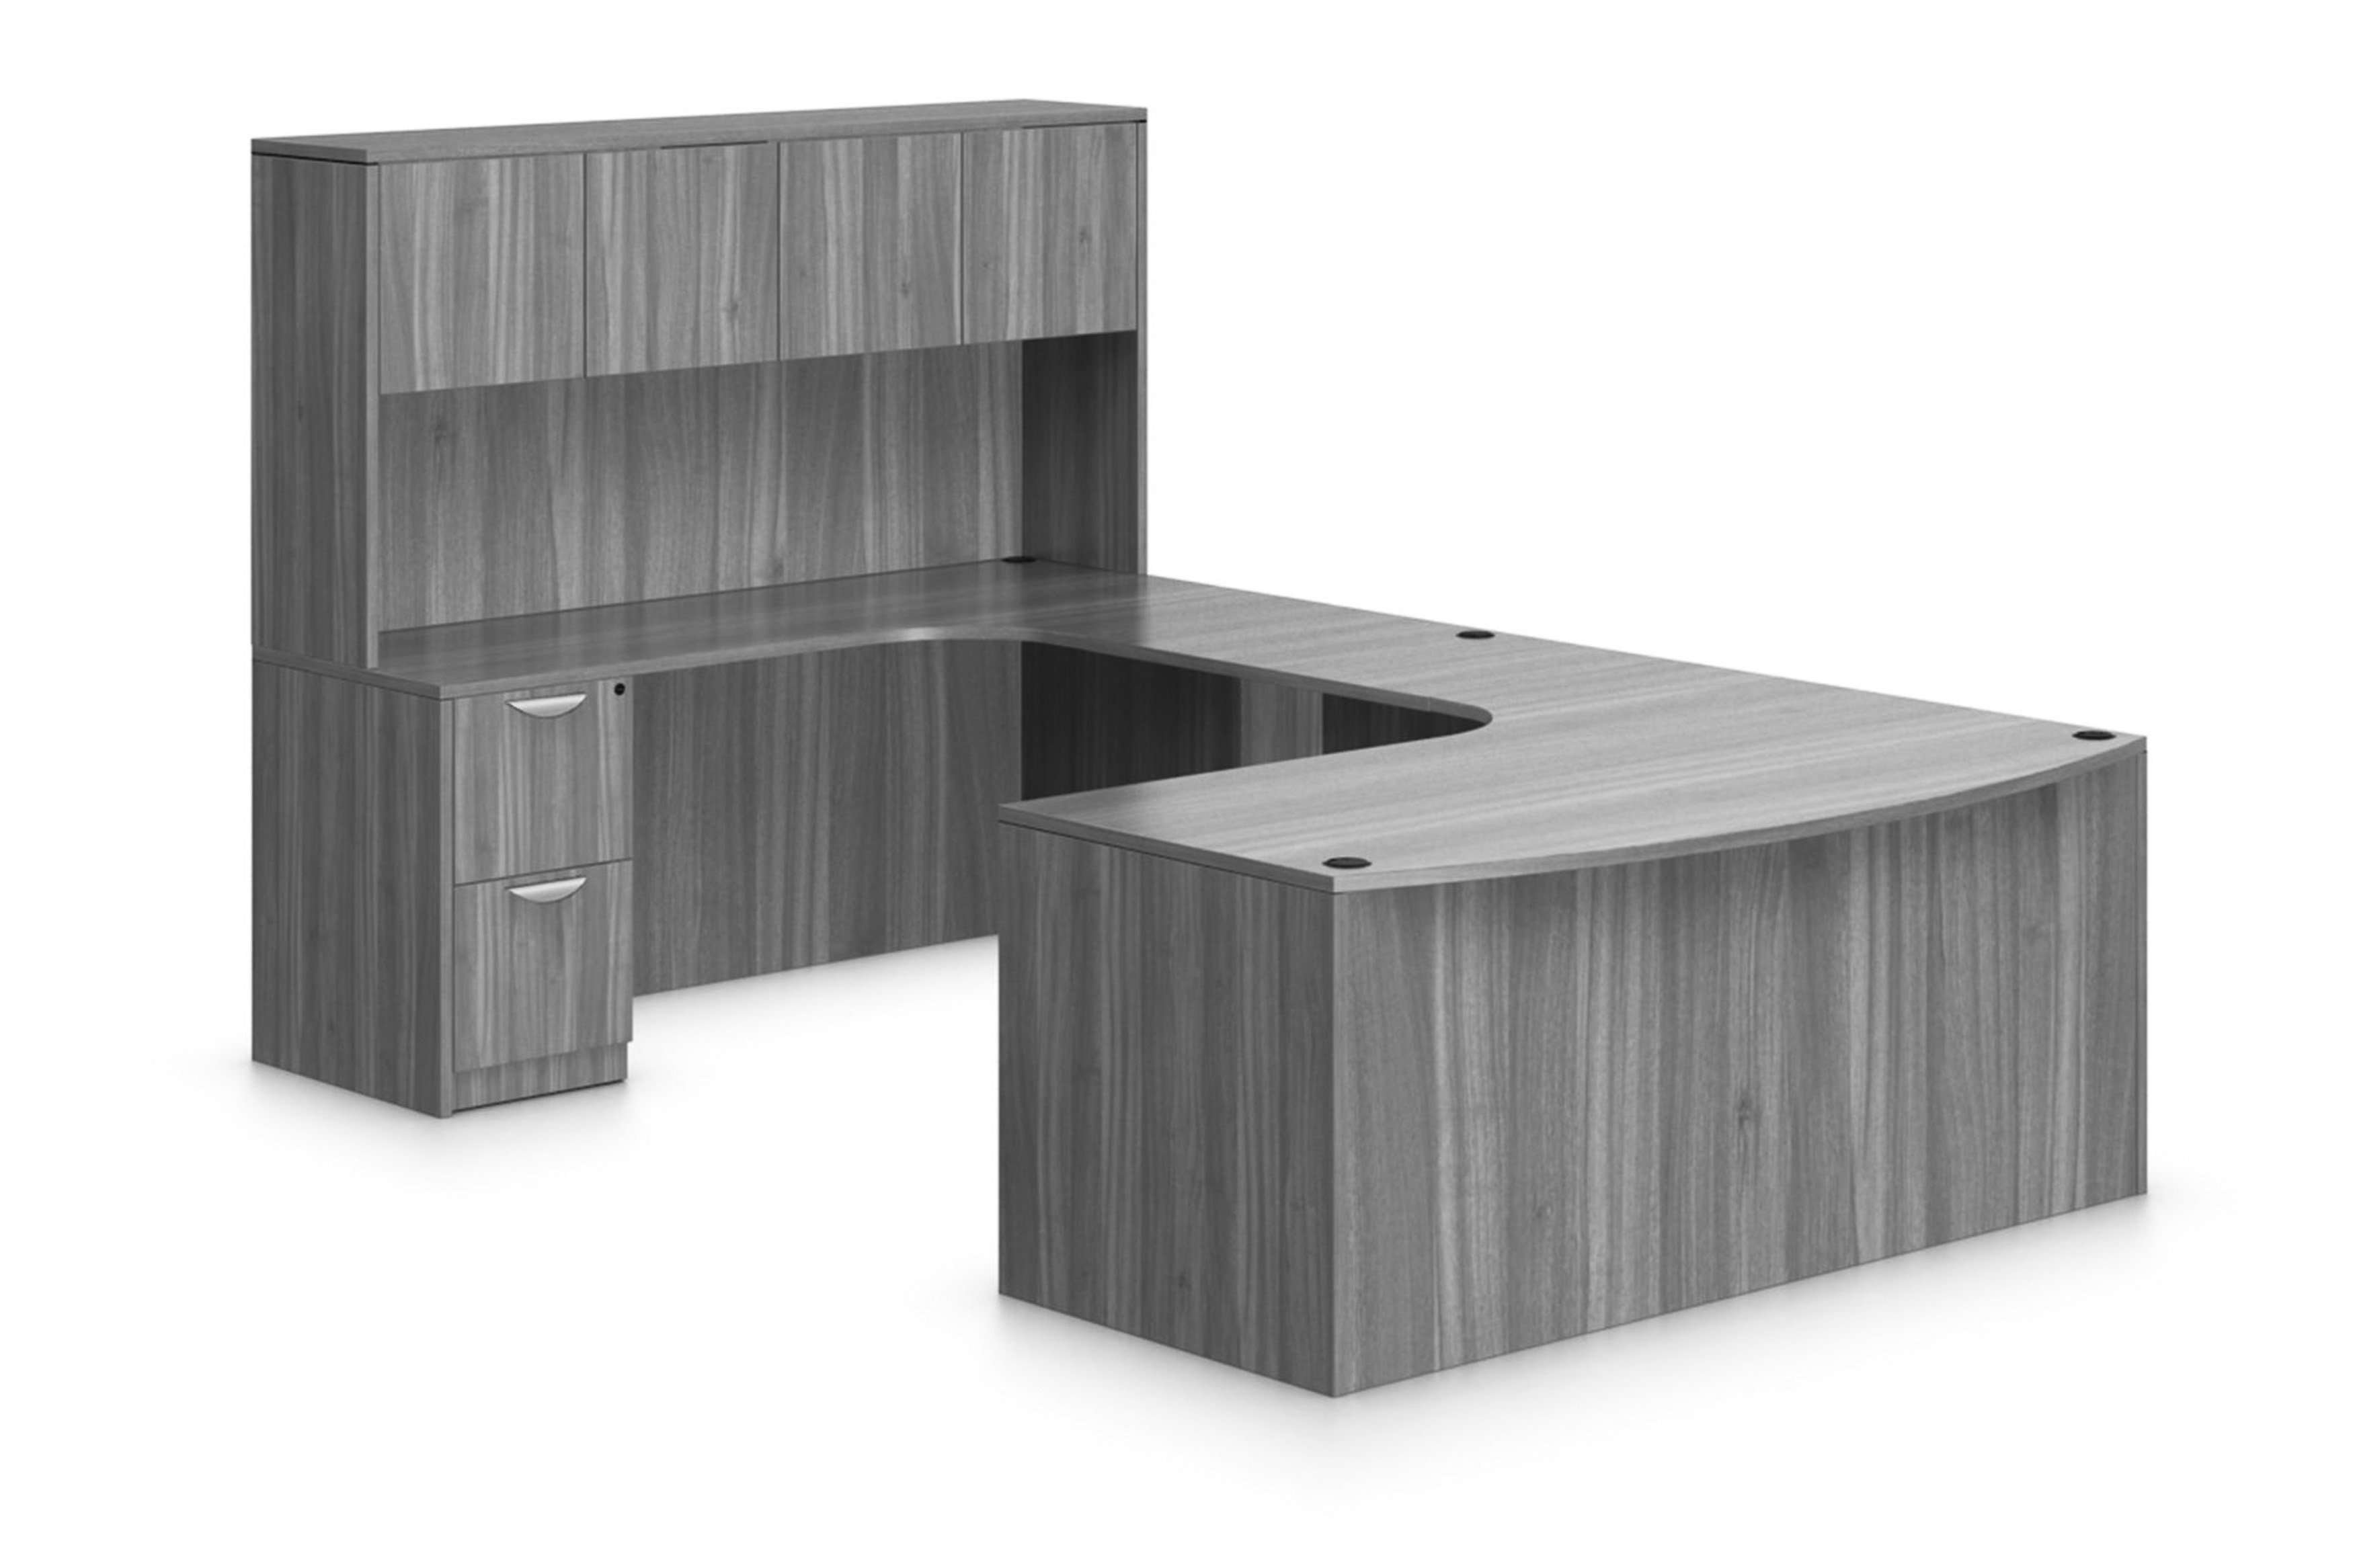 warren-series-u-shaped-bow-front-laminate-desks-with-rounded-corners-overhead-storage